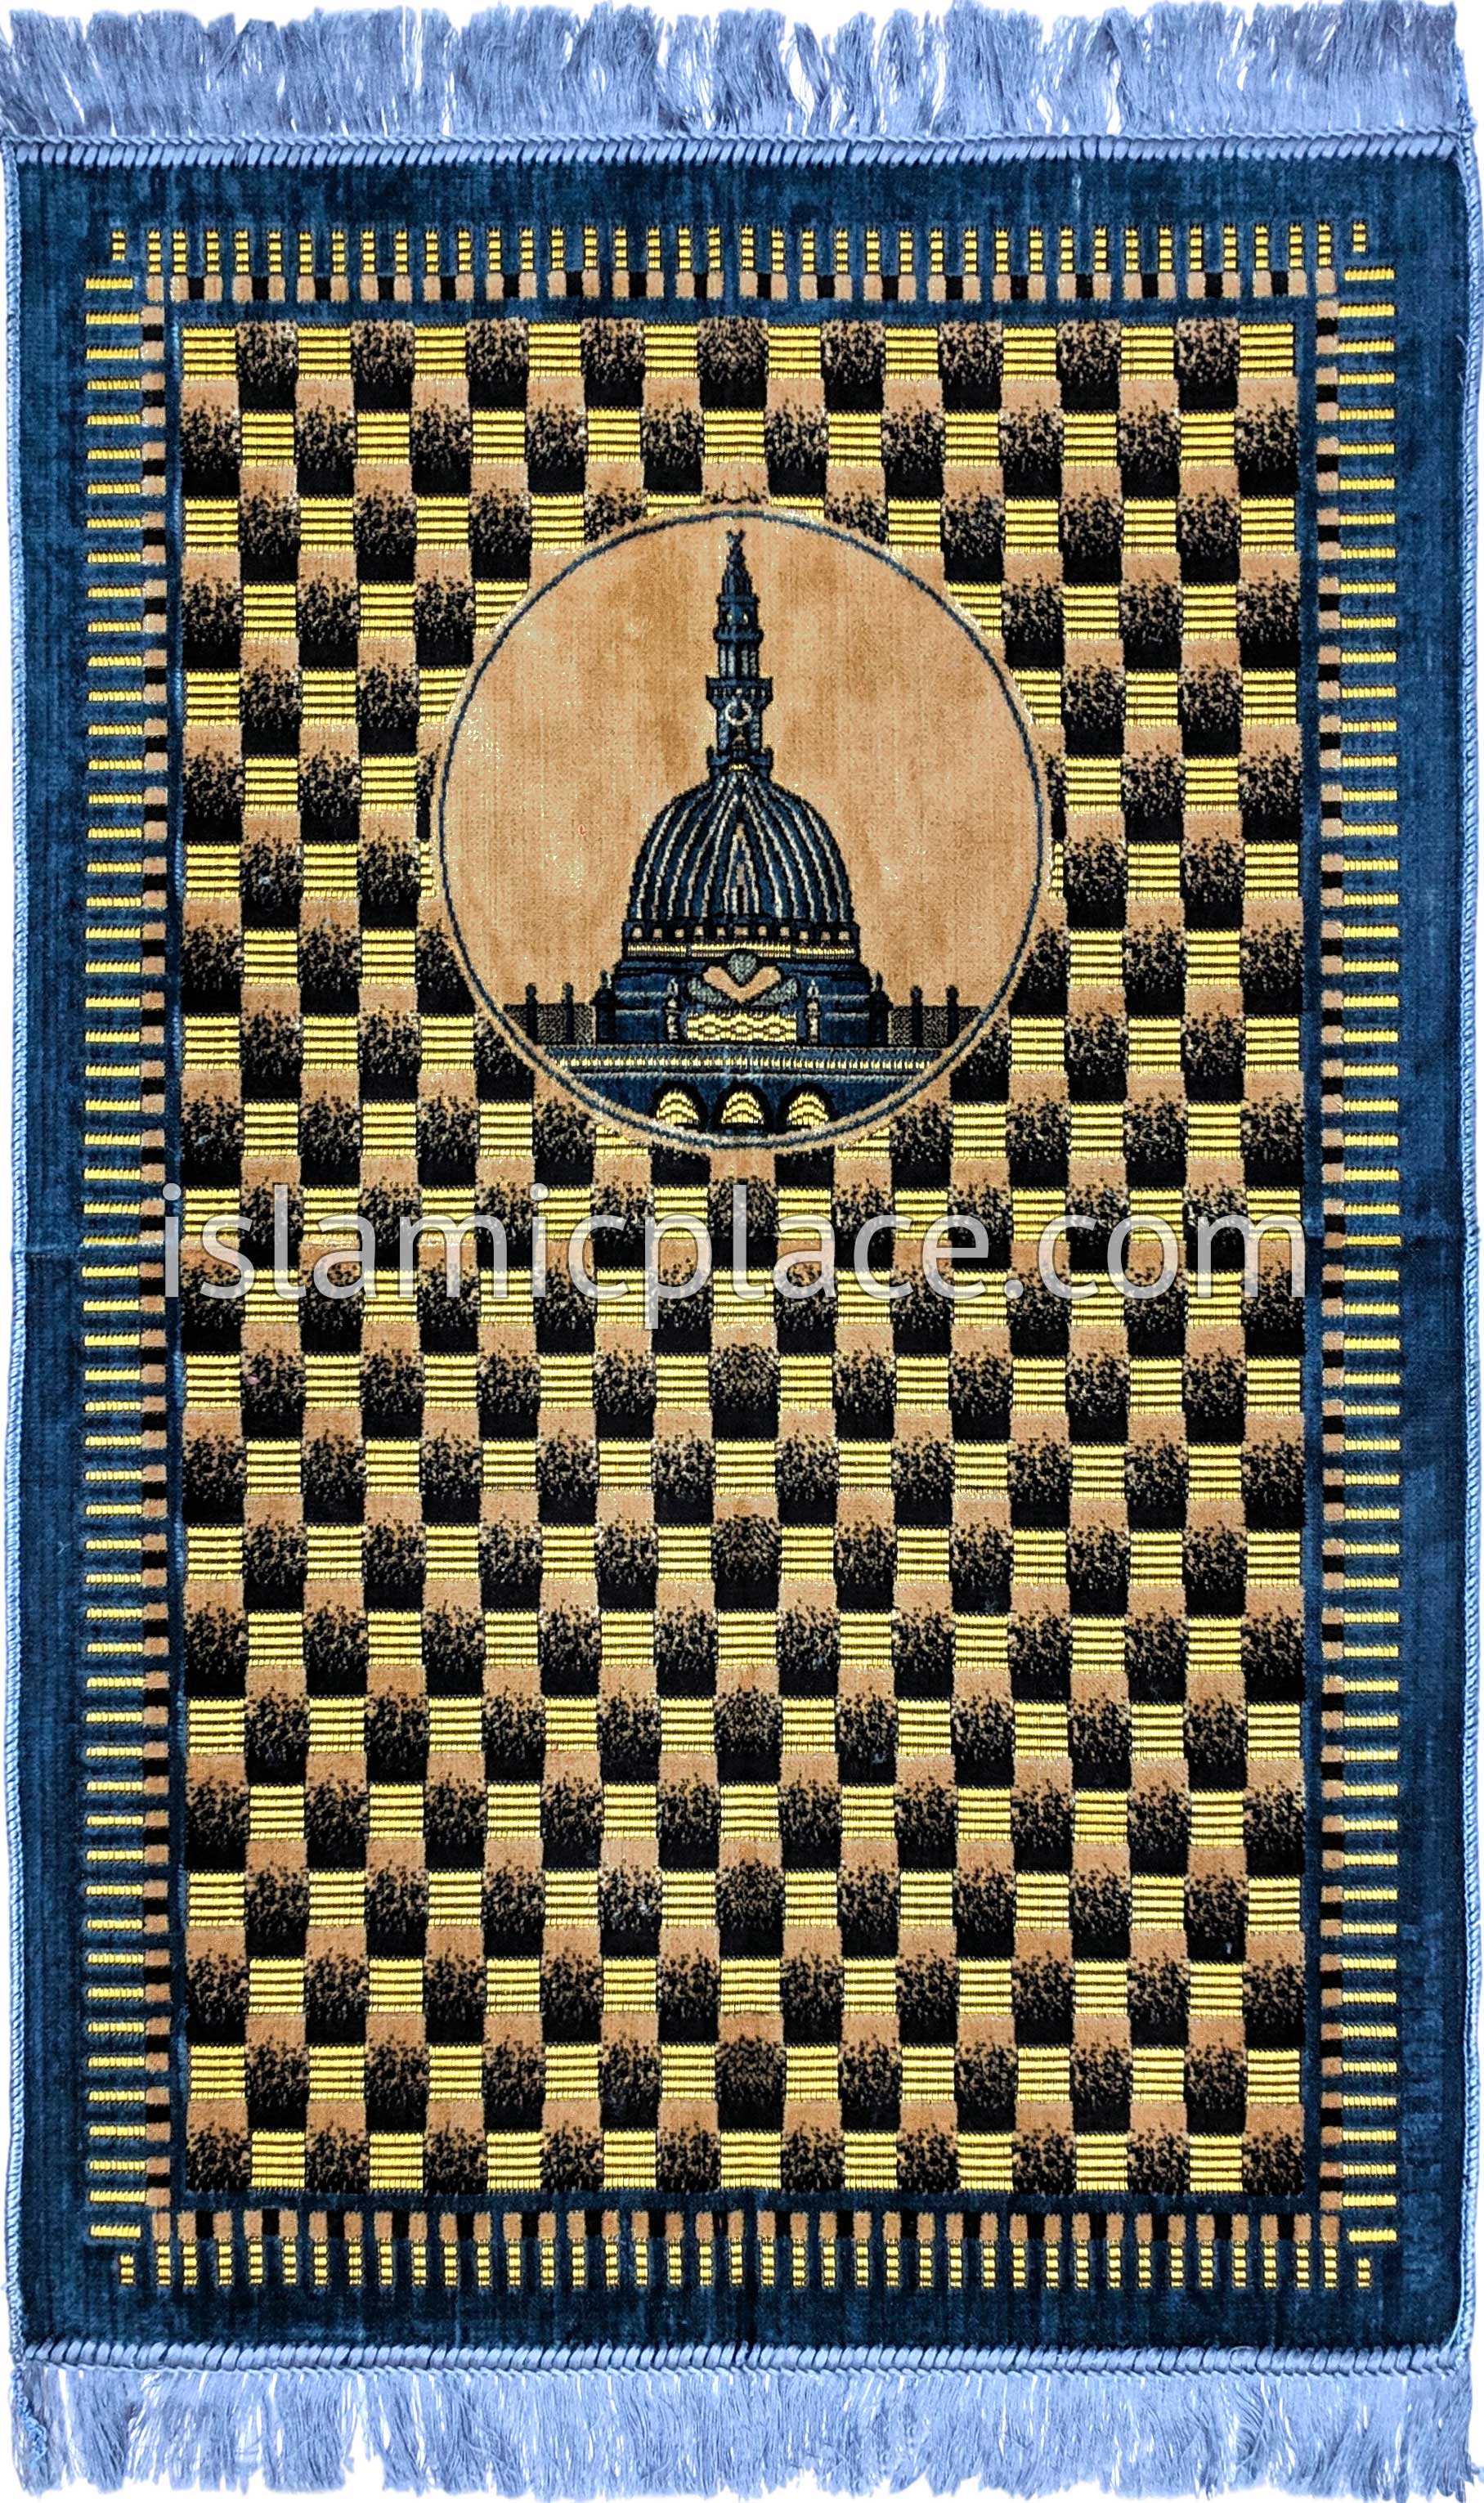 Checkered Teal, Black & Gold  Prayer Rug with Mosque